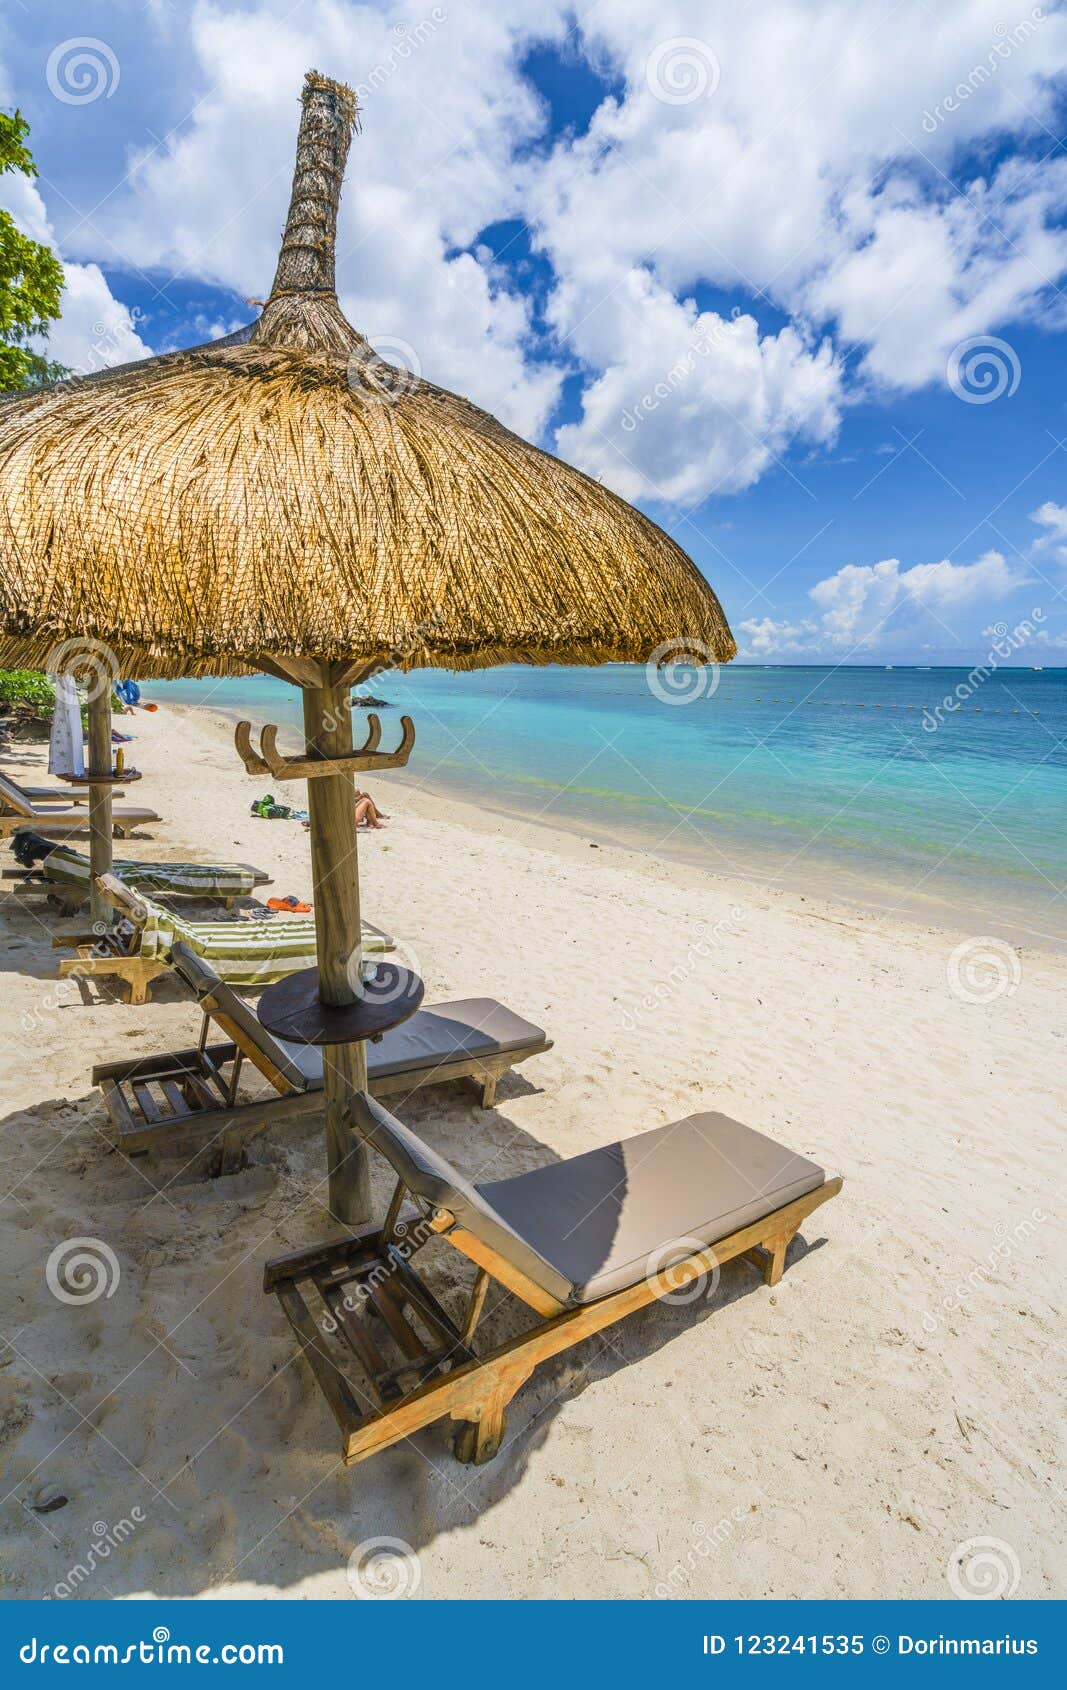 tropical scenery with amazing beaches of mauritius island